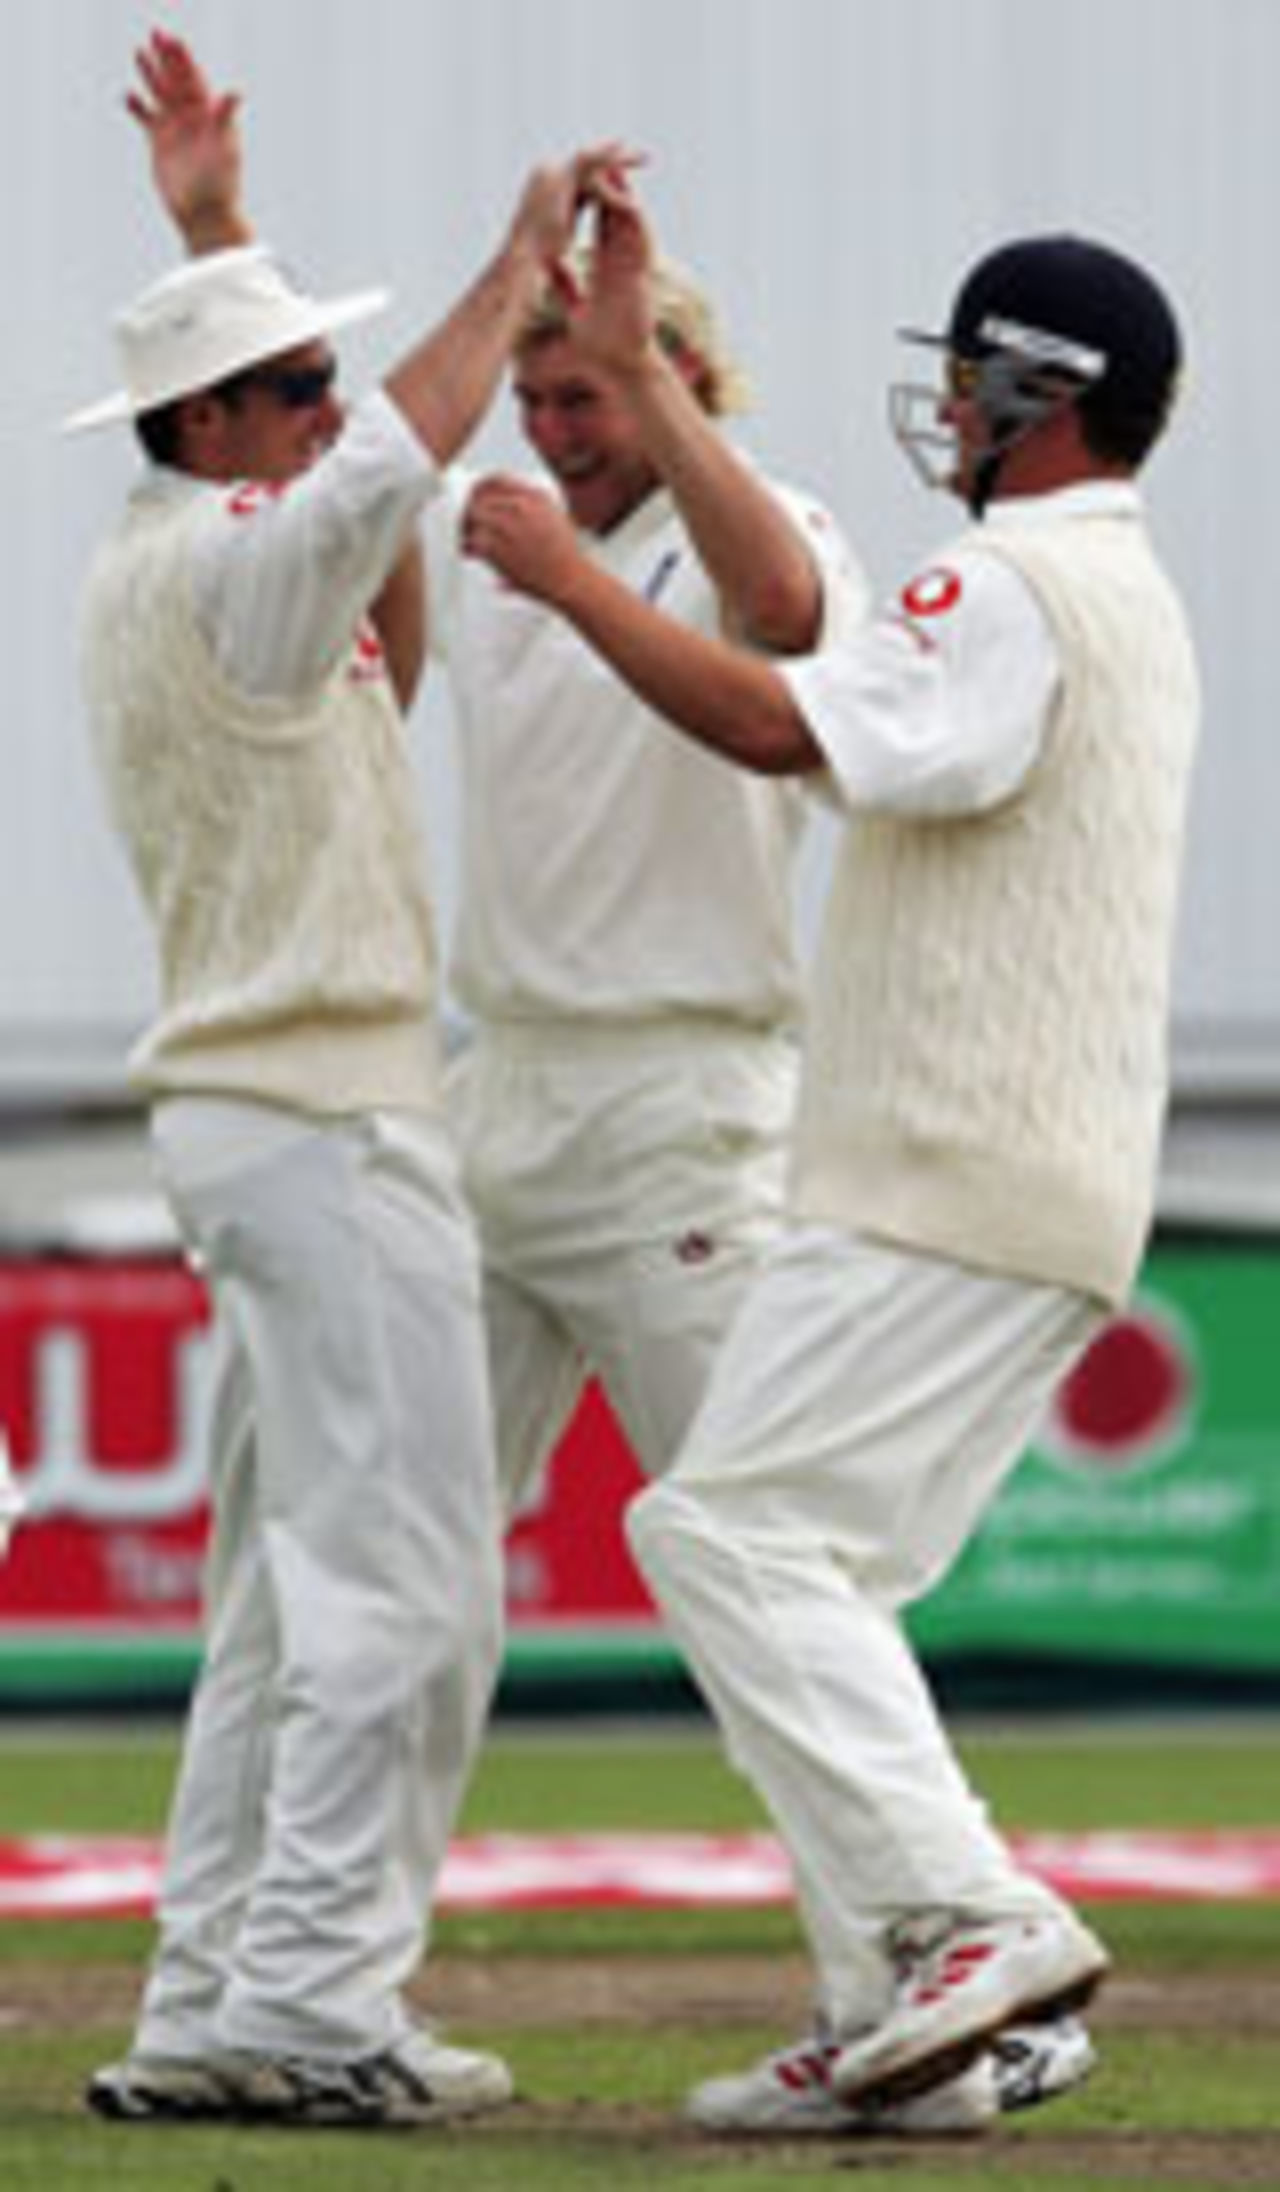 Matthew Hoggard celebrates the wicket of Chris Gayle, England v West Indies, 3rd Test, Old Trafford, August 12, 2004